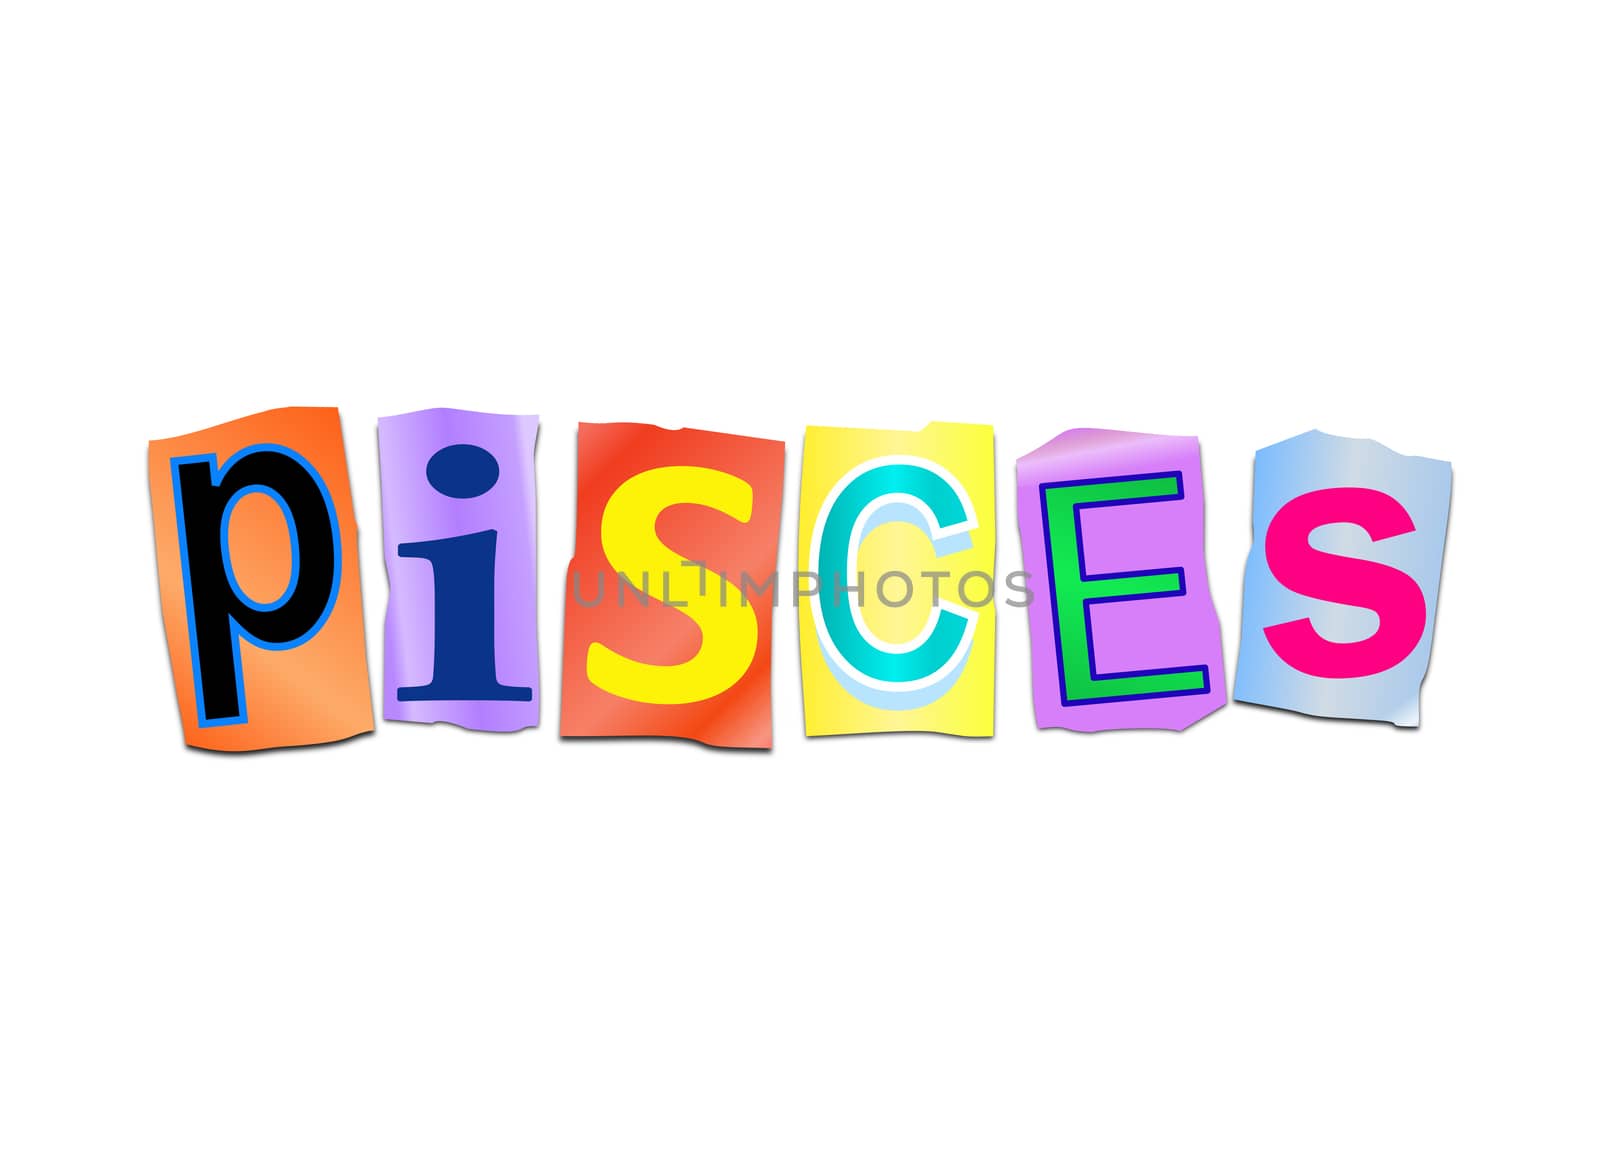 Illustration depicting a set of cut out printed letters arranged to form the word pisces.